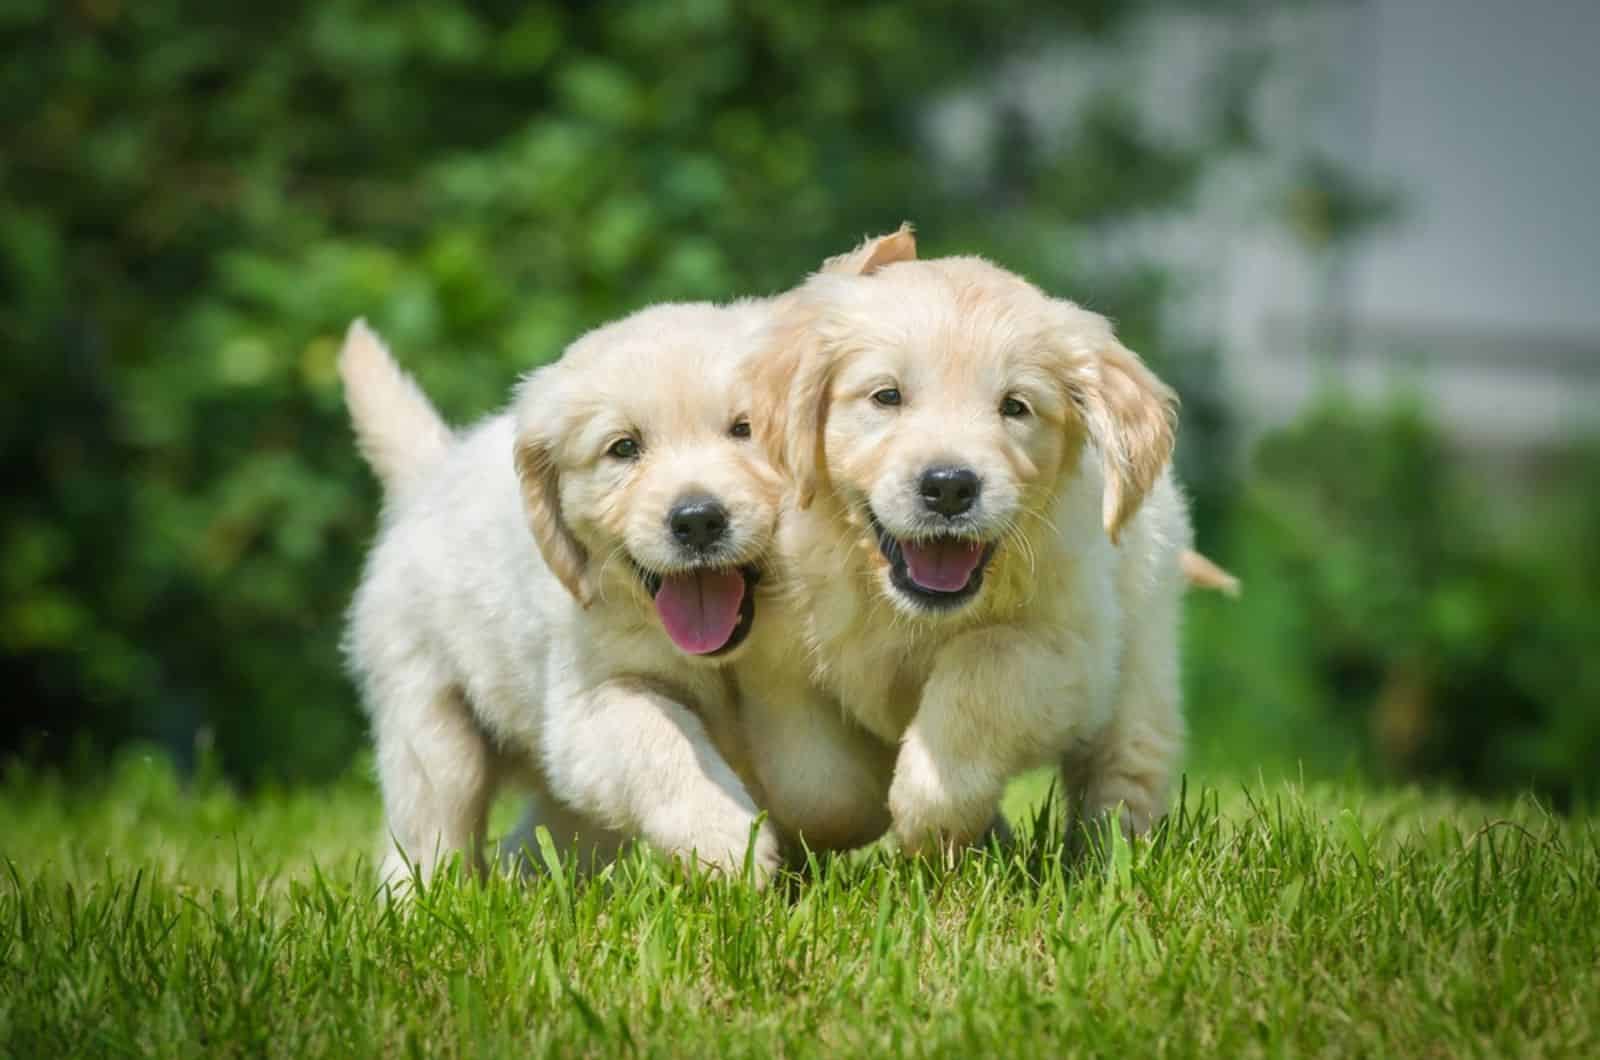 two cute golden retriever puppies playing on the lawn